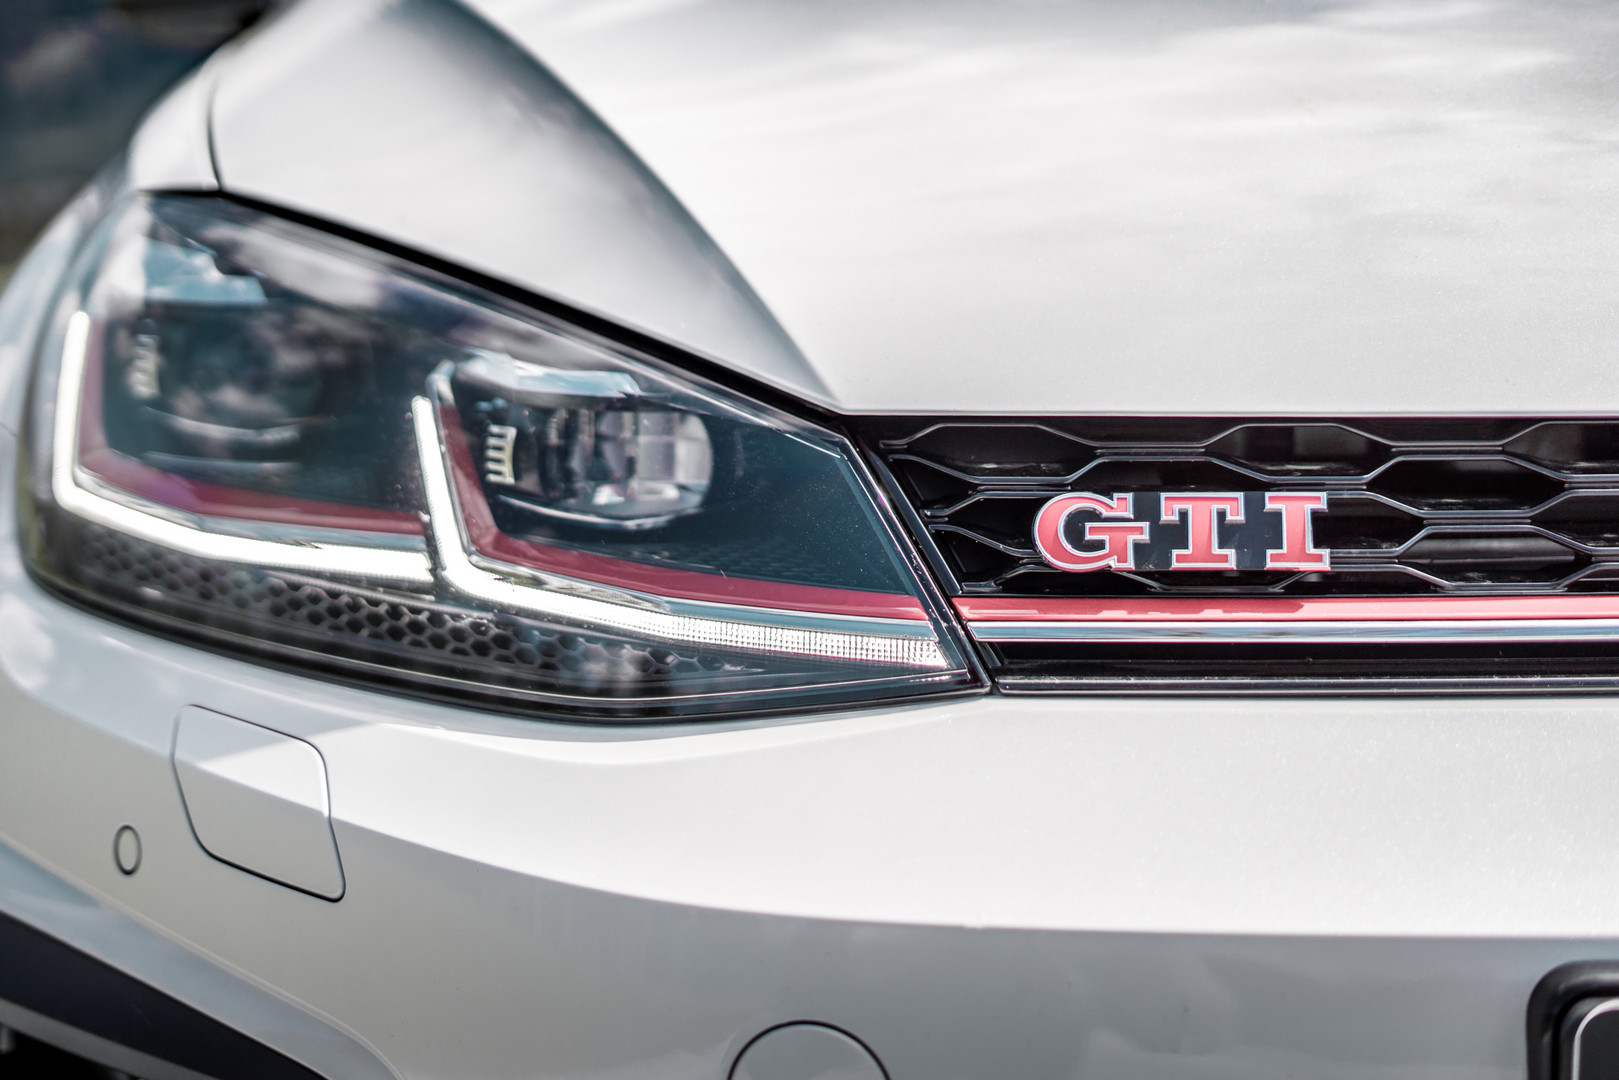 Golf GTI Badge Front